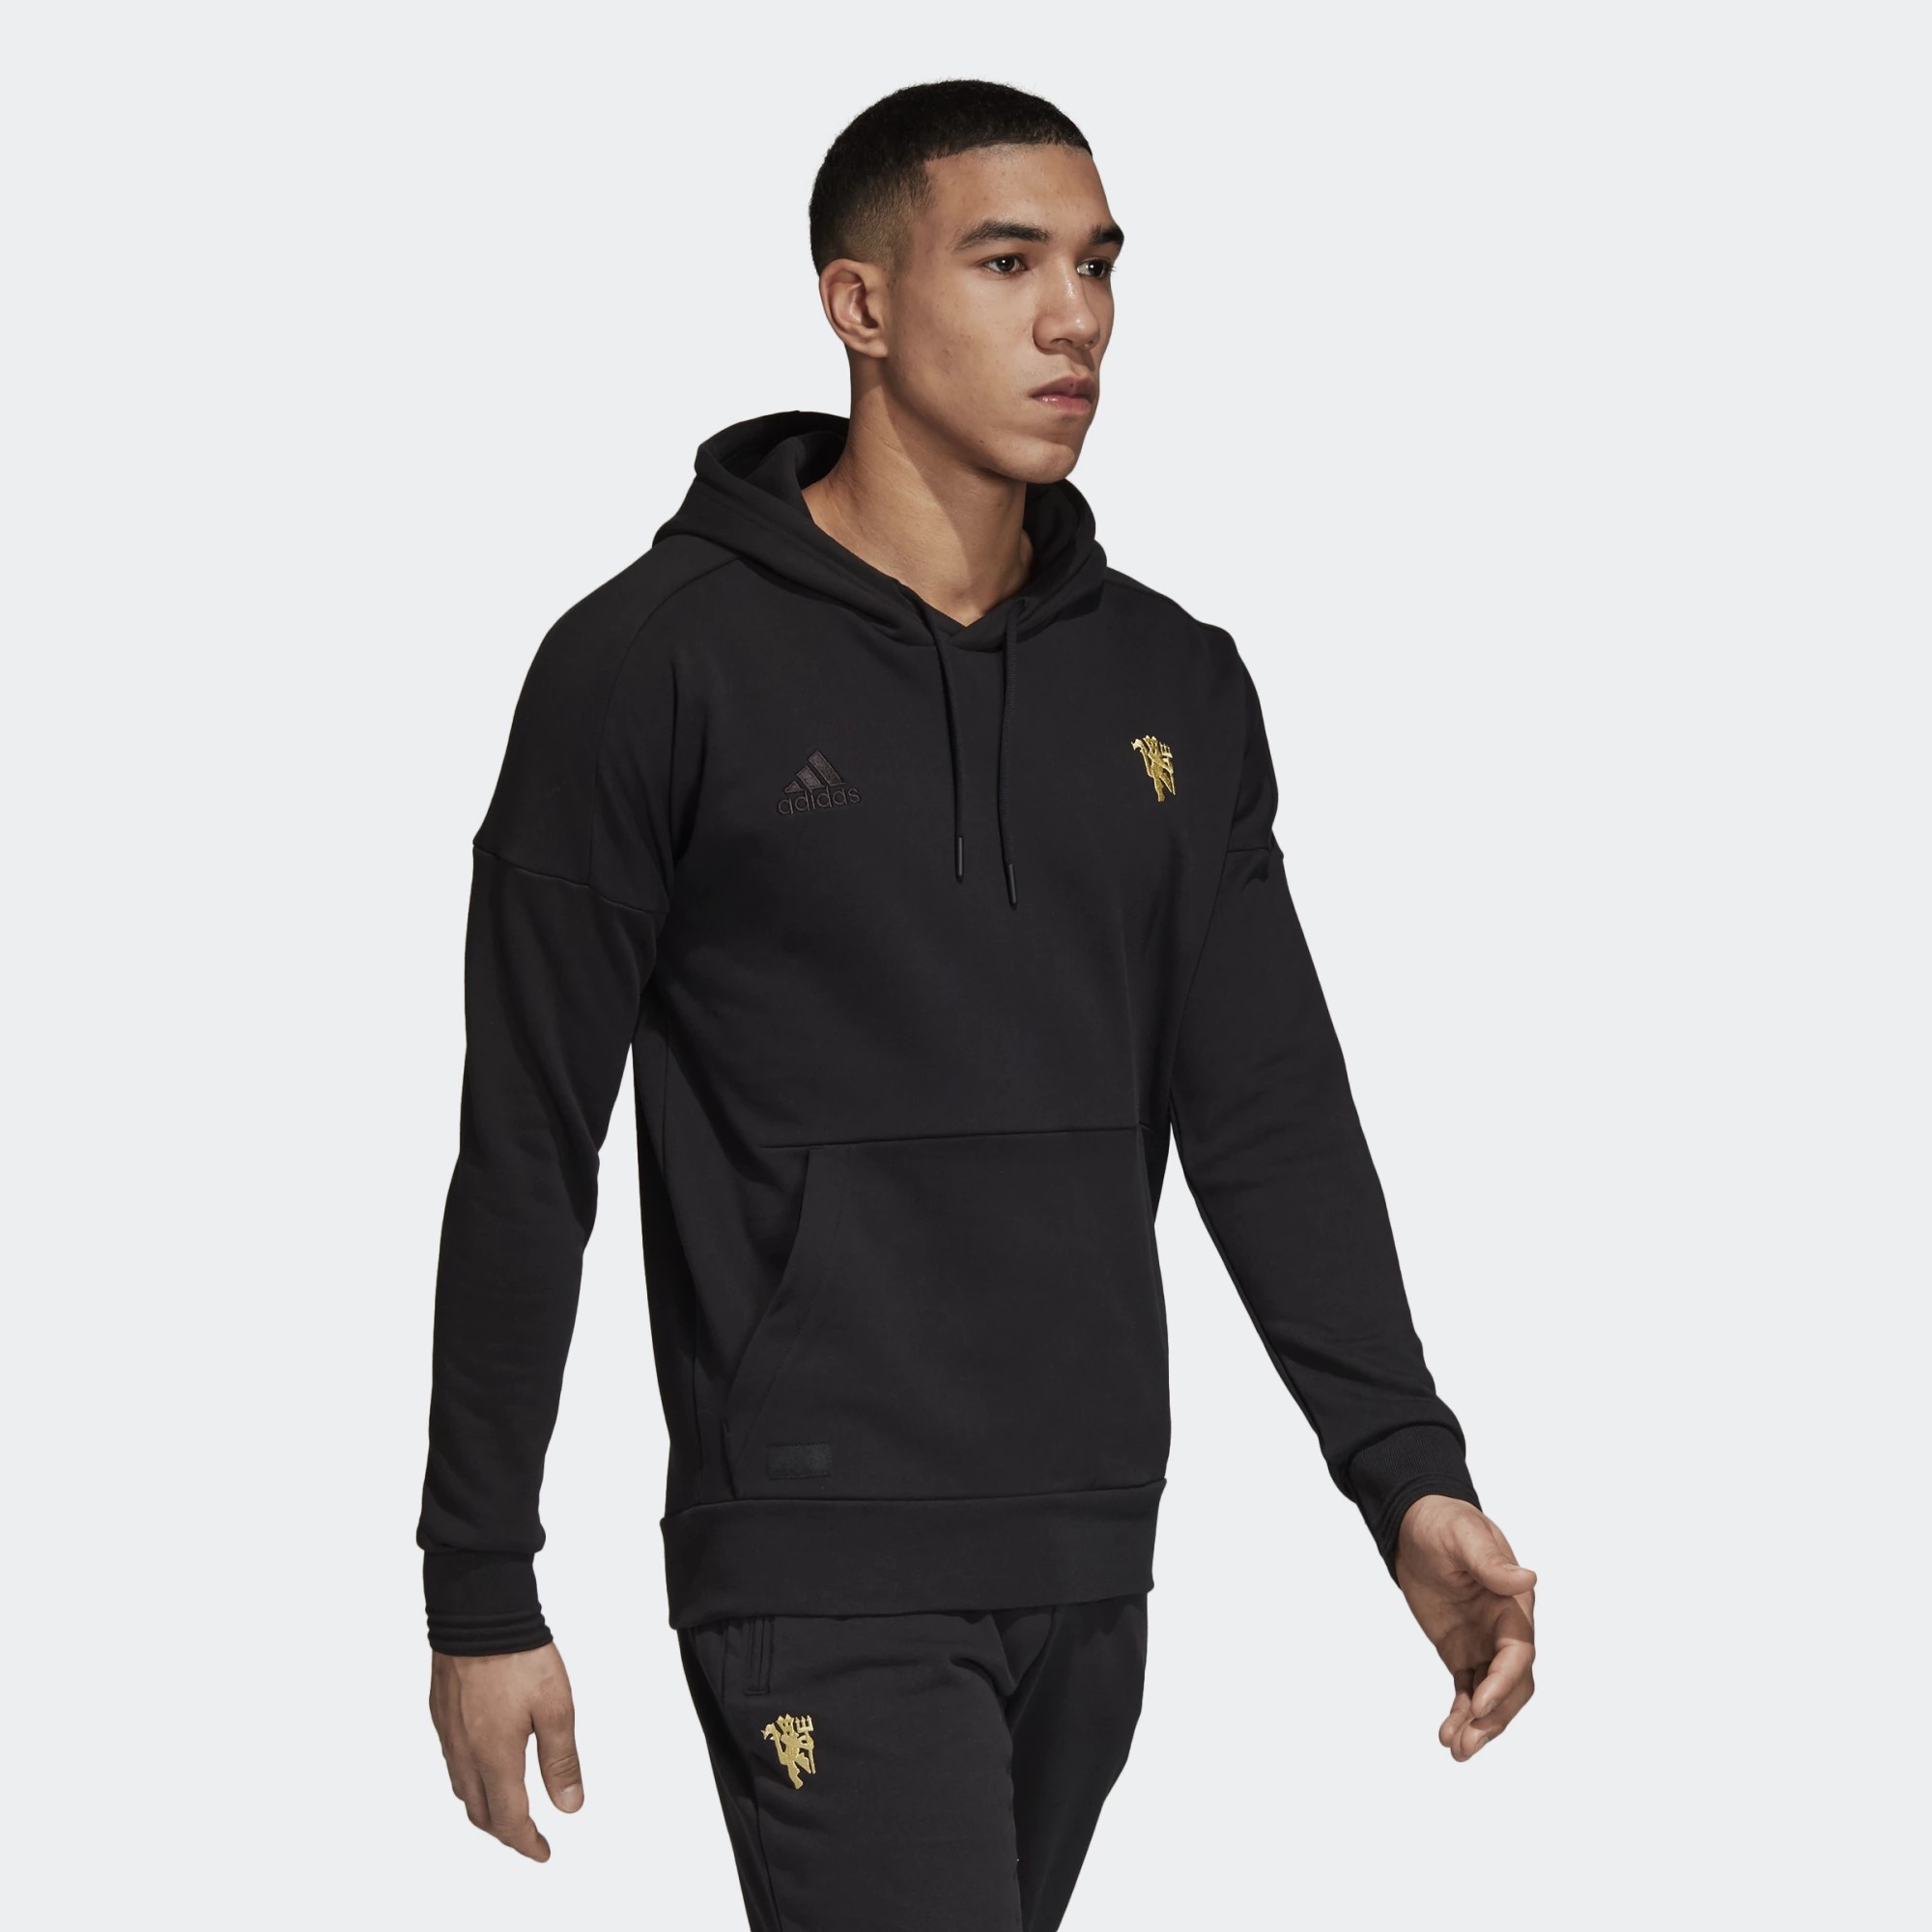 Man United Hoodie / Cheap clothing stores - Manchester united hoodie